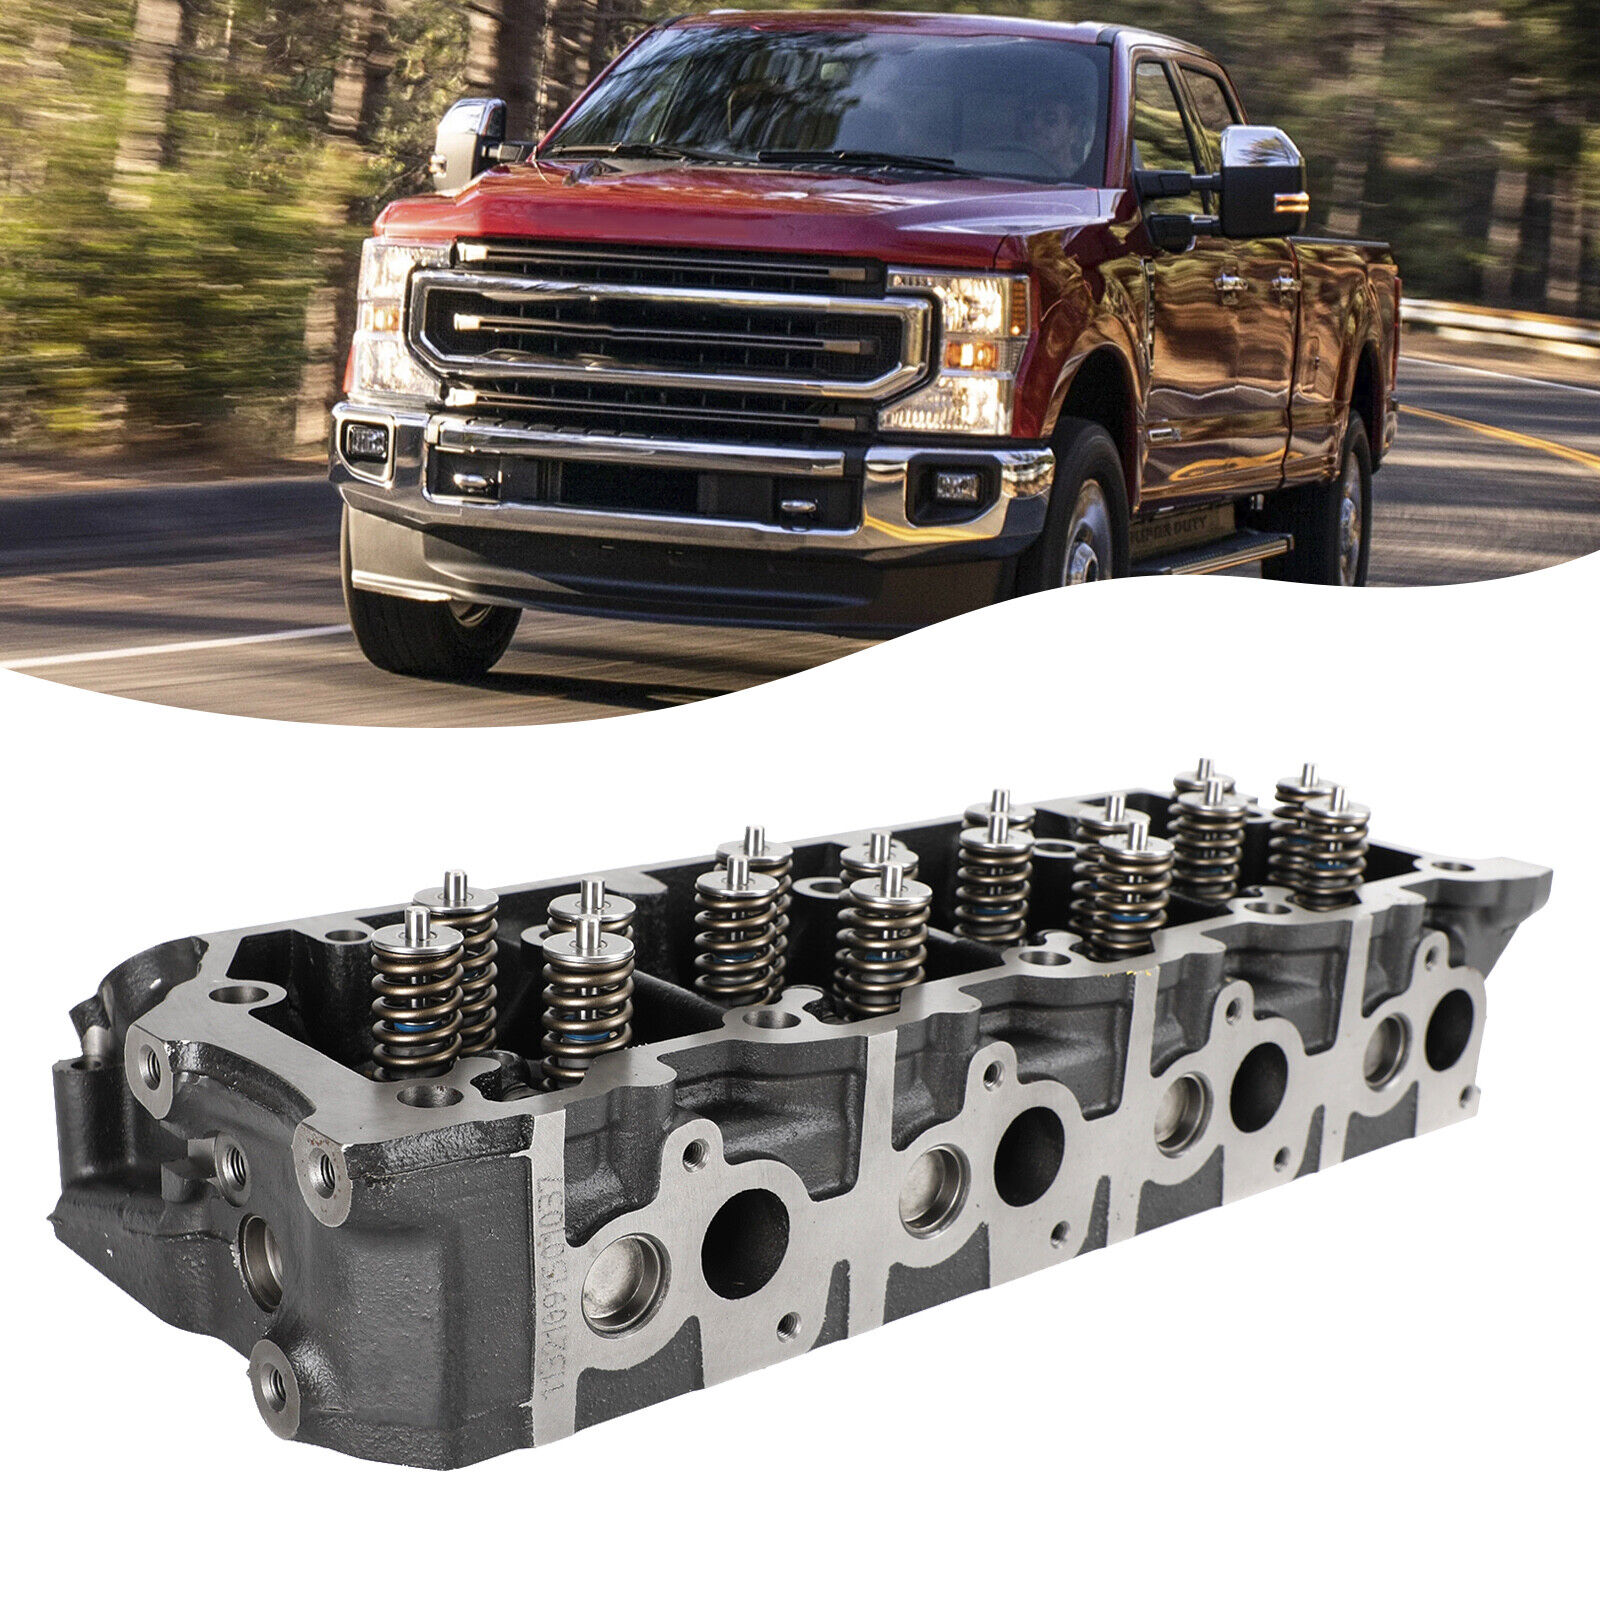 Cylinder Head 18mm 1843030C1 For Ford Super Duty F-250 350 6.0L Powerstroke F13